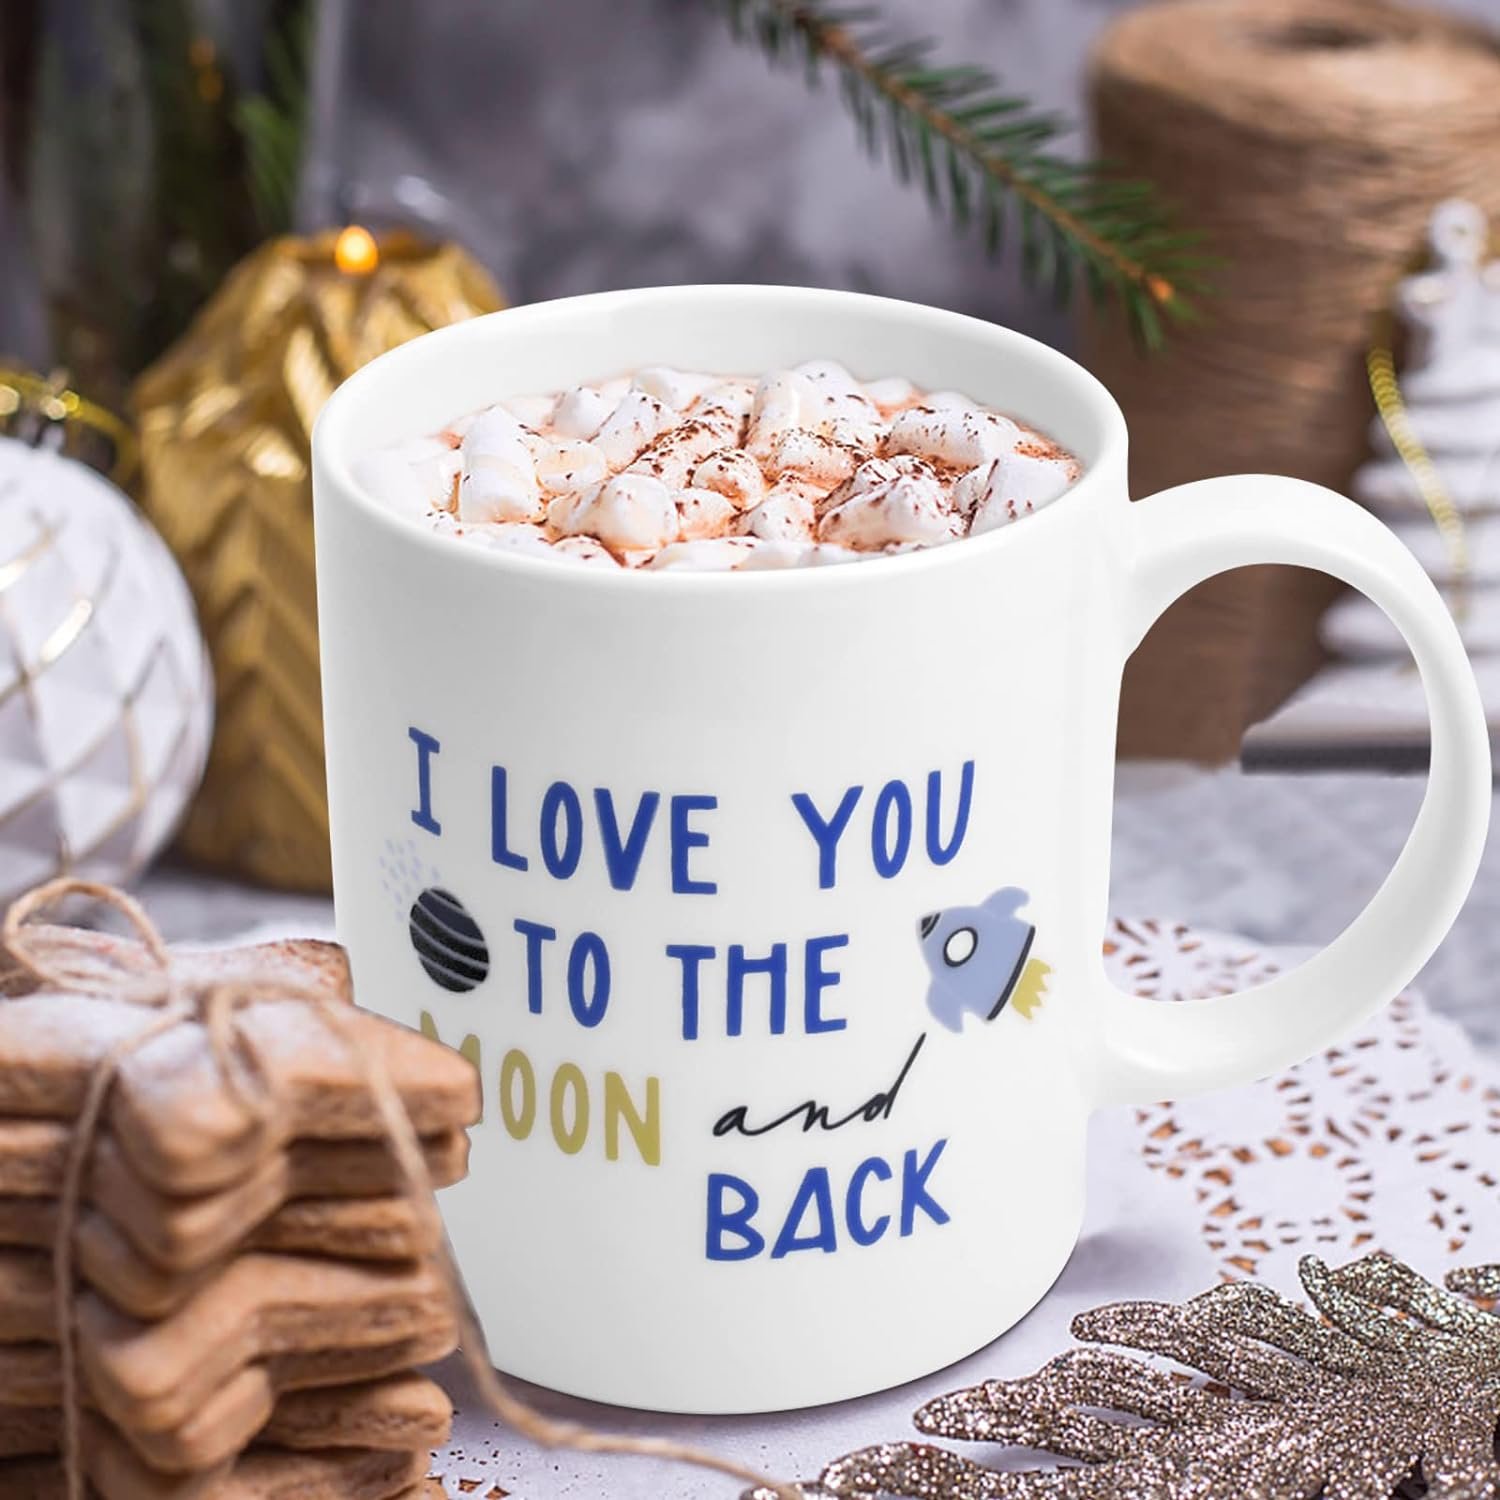 Fathers Day Funny Gifts for Dad Husband Him from Daughter Son Kids Wife - 11 OZ Ceramic Coffee Mug - Stocking Stuffers for Christmas Xmas,Birthday, Anniversary Gag Presents Ideas for PaPa Step Dad